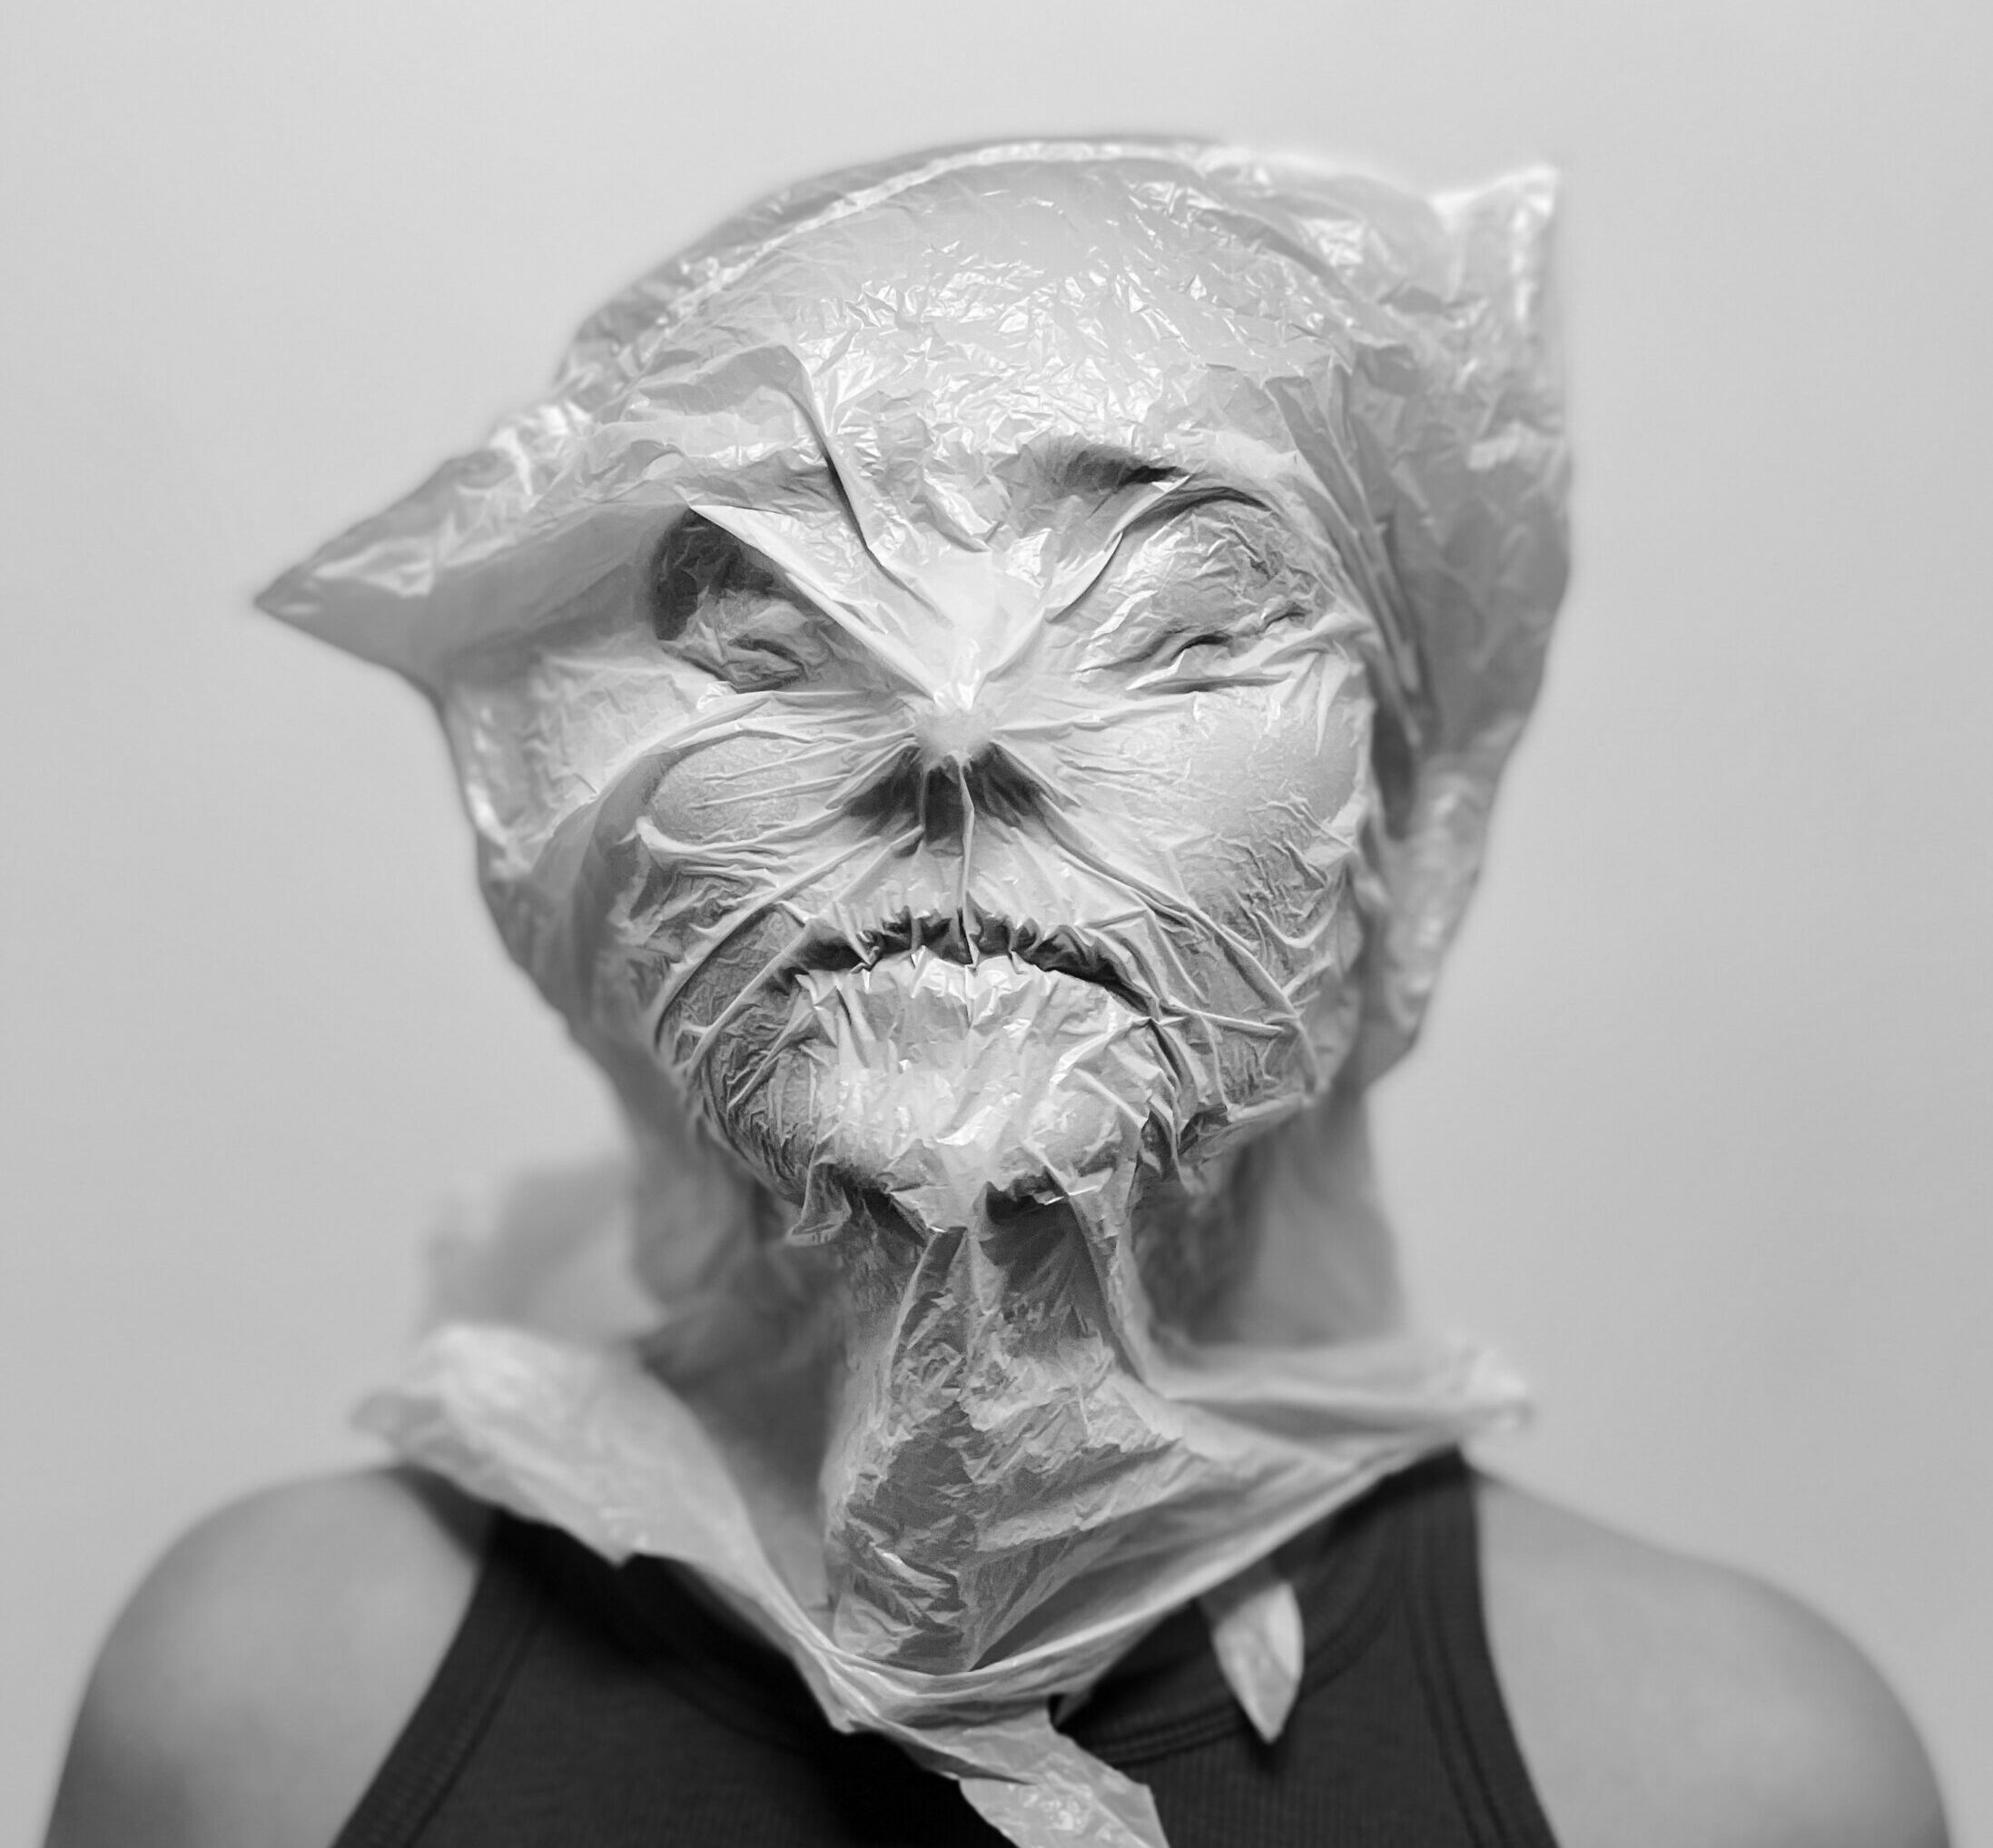 A woman wearing a black shirt breathes in a plastic bag over her head. She is calm.